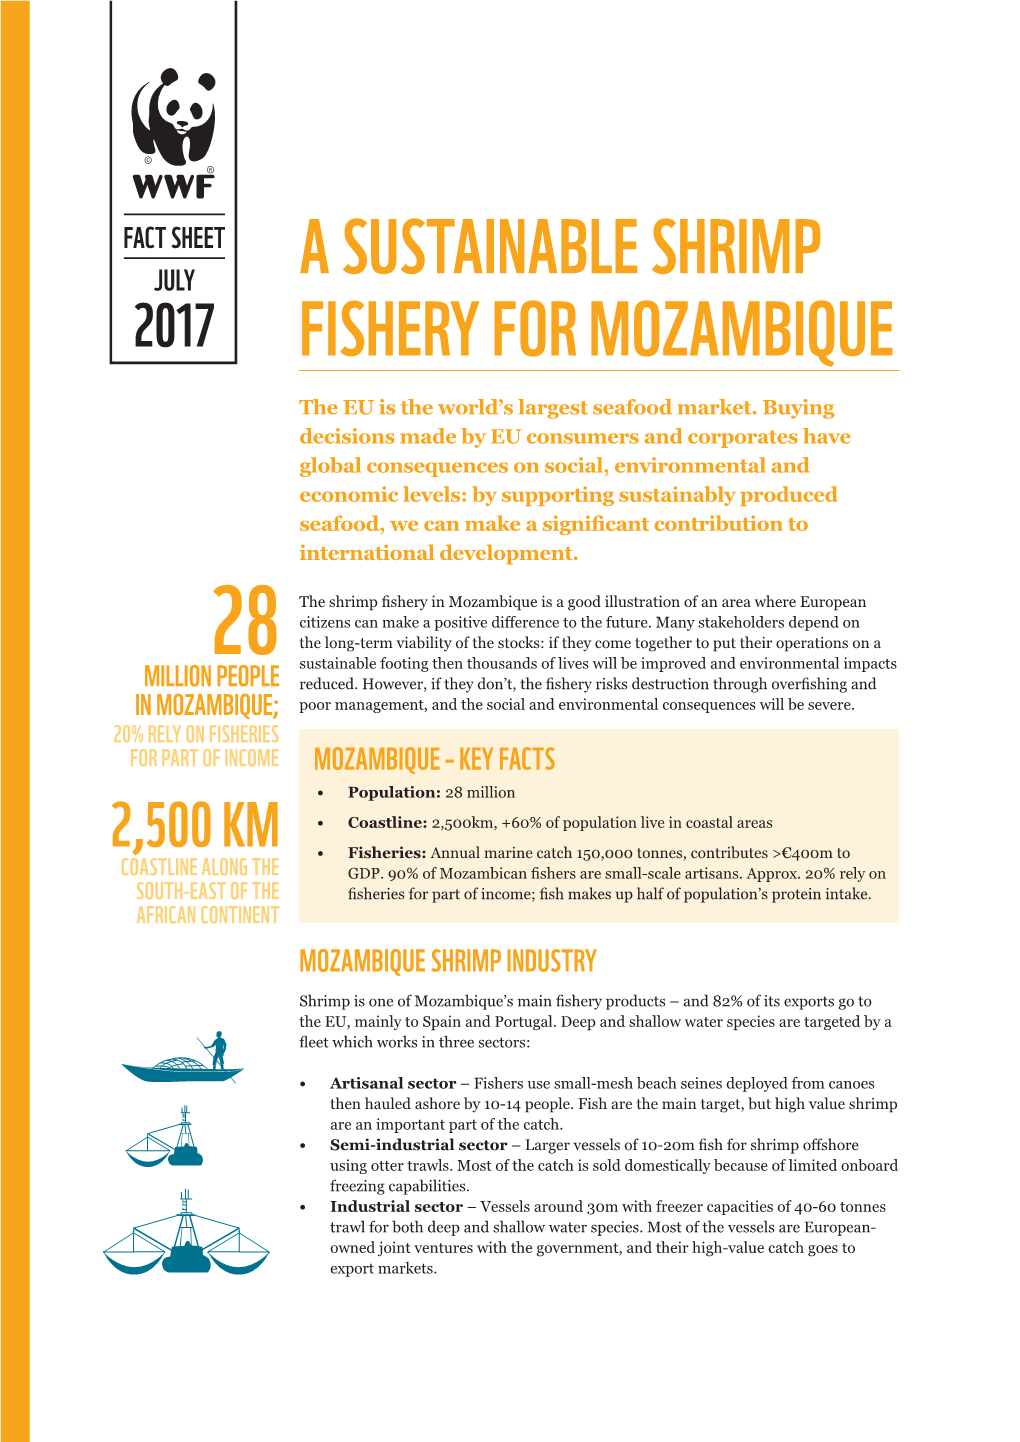 A Sustainable Shrimp Fishery for Mozambique